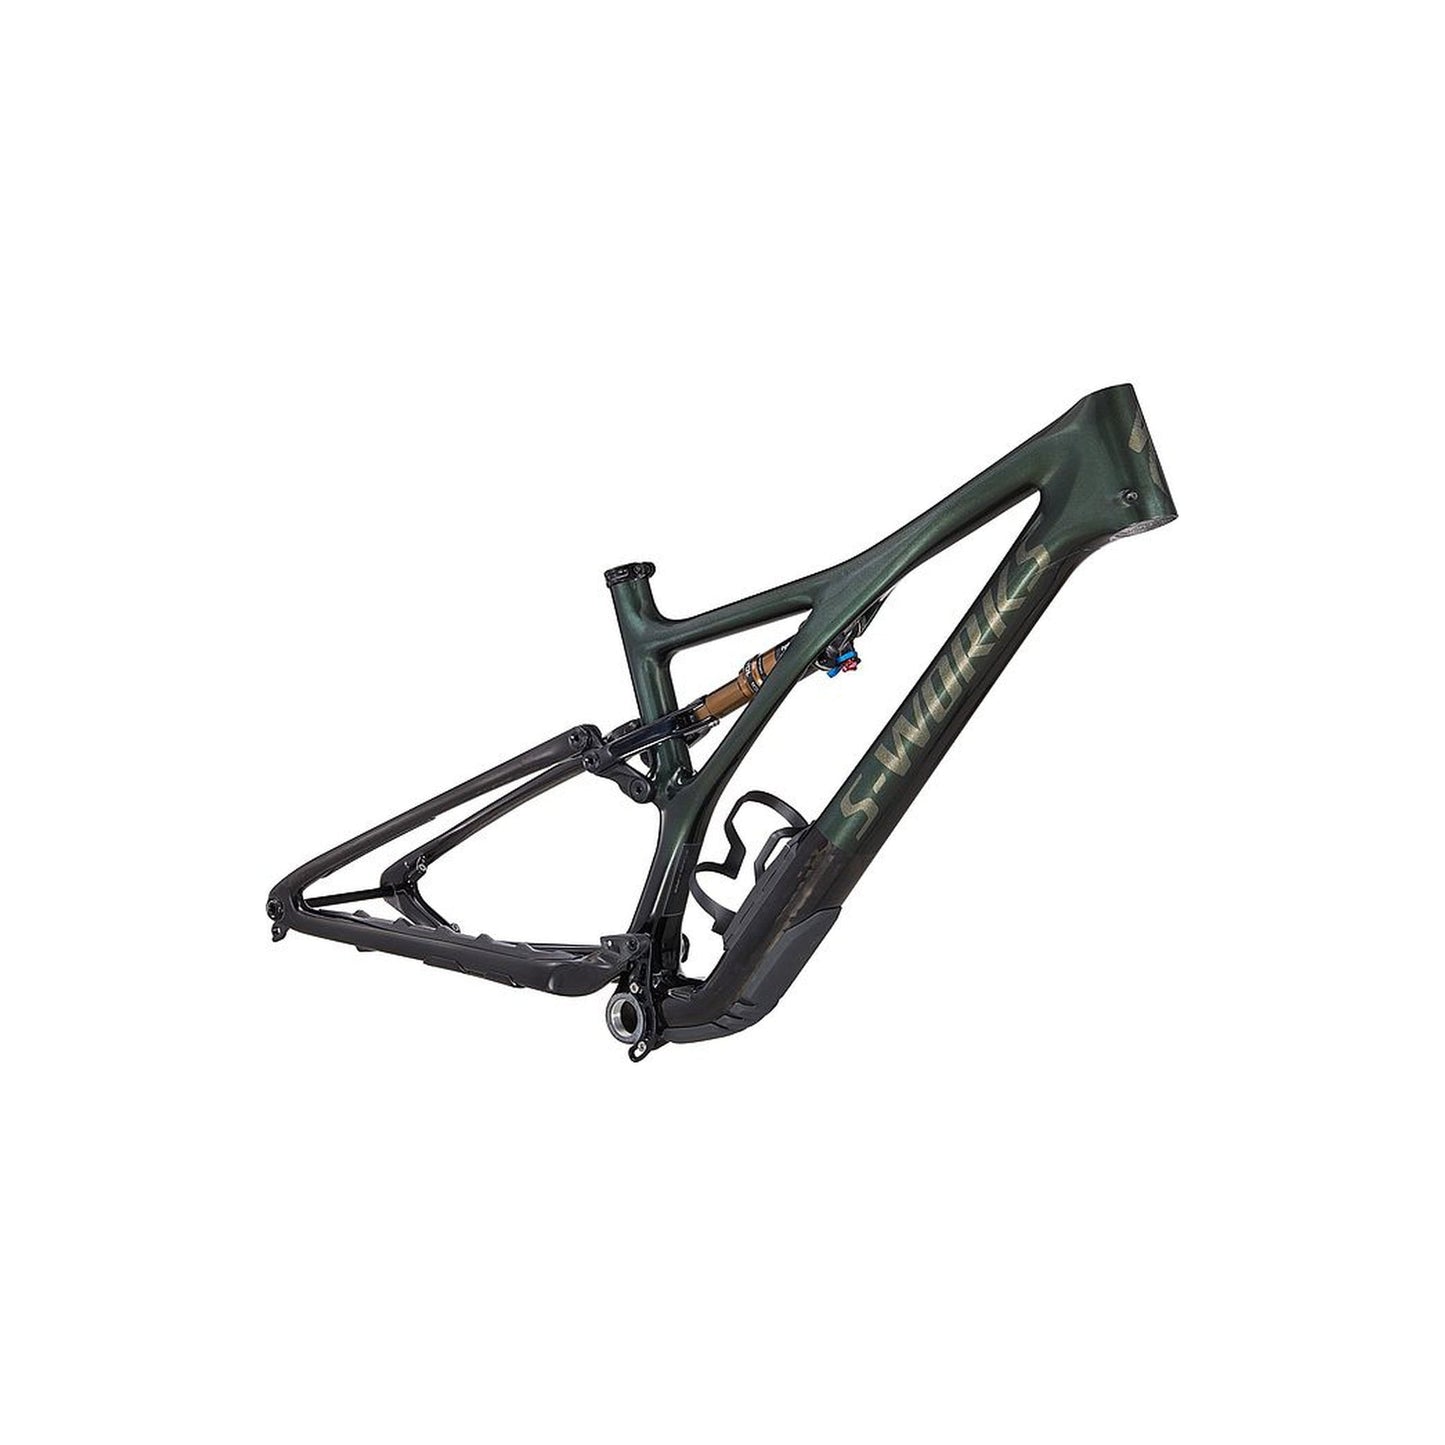 S-Works Stumpjumper Frame-Cycles Direct Specialized